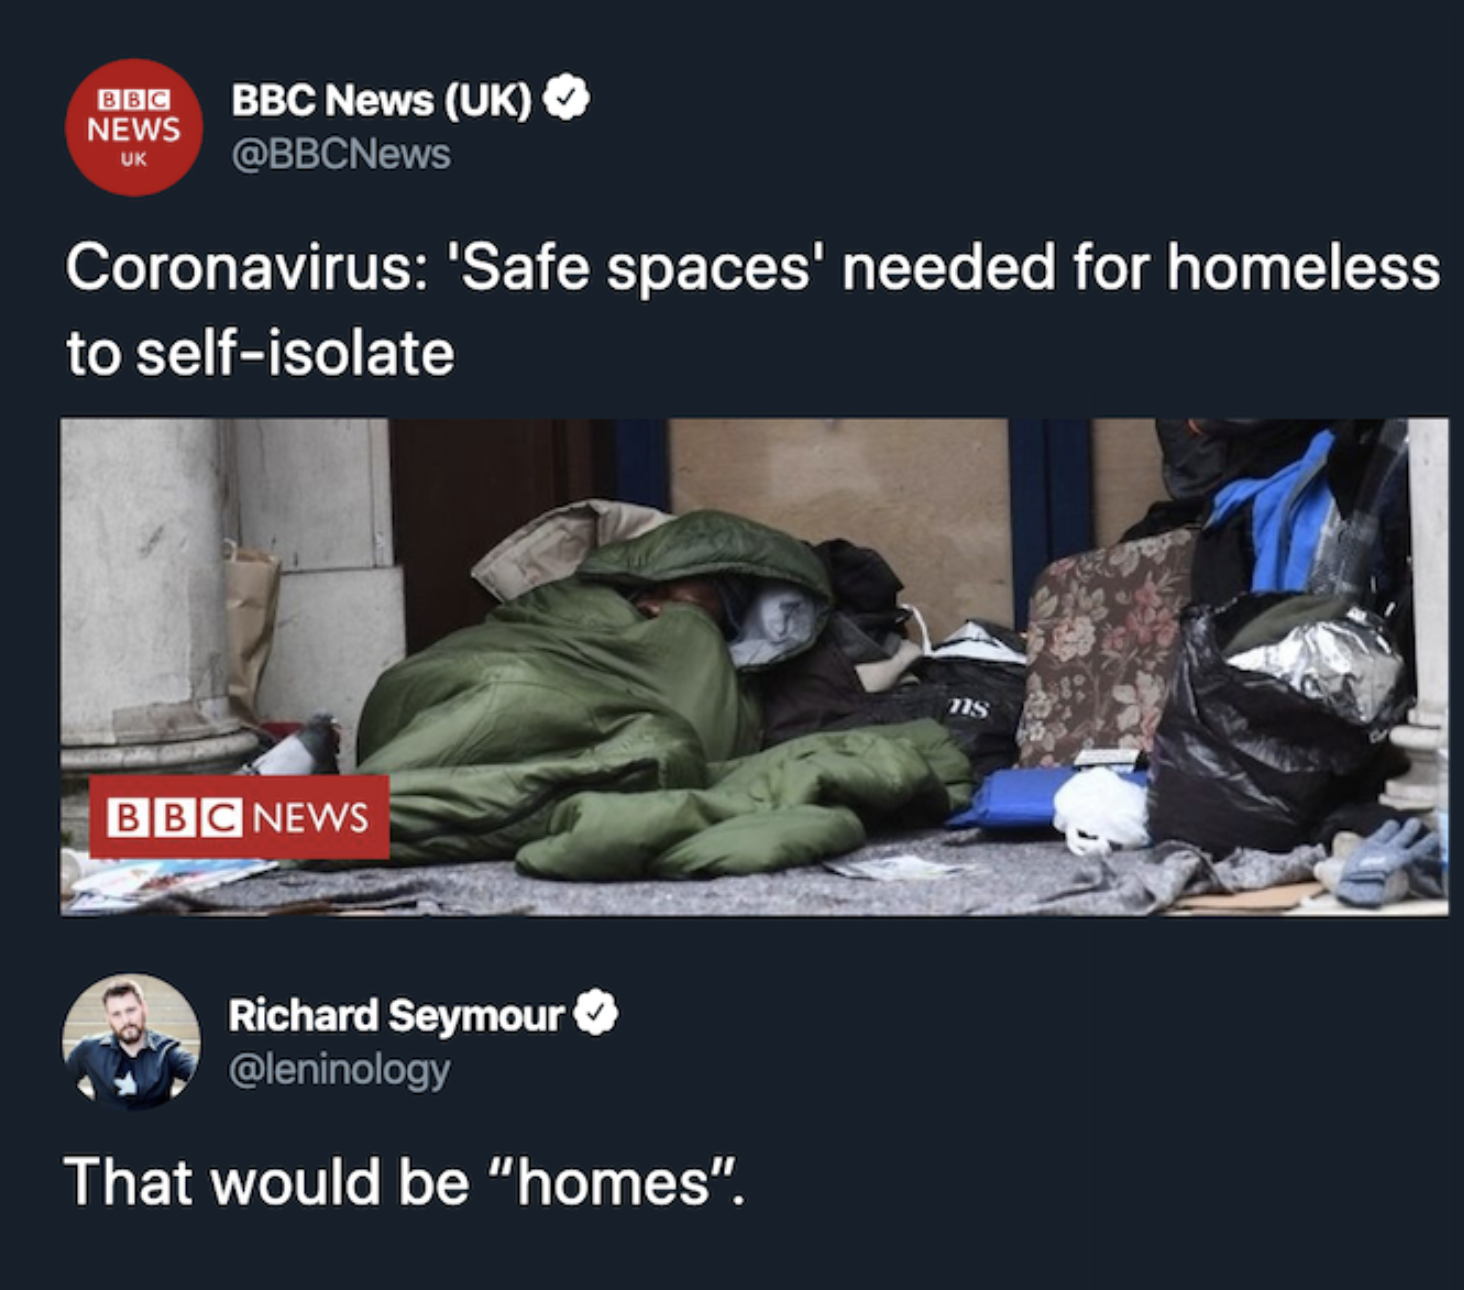 bbc one - Boc News Bbc News Uk Coronavirus 'Safe spaces' needed for homeless to selfisolate Bbc News Richard Seymour That would be "homes".